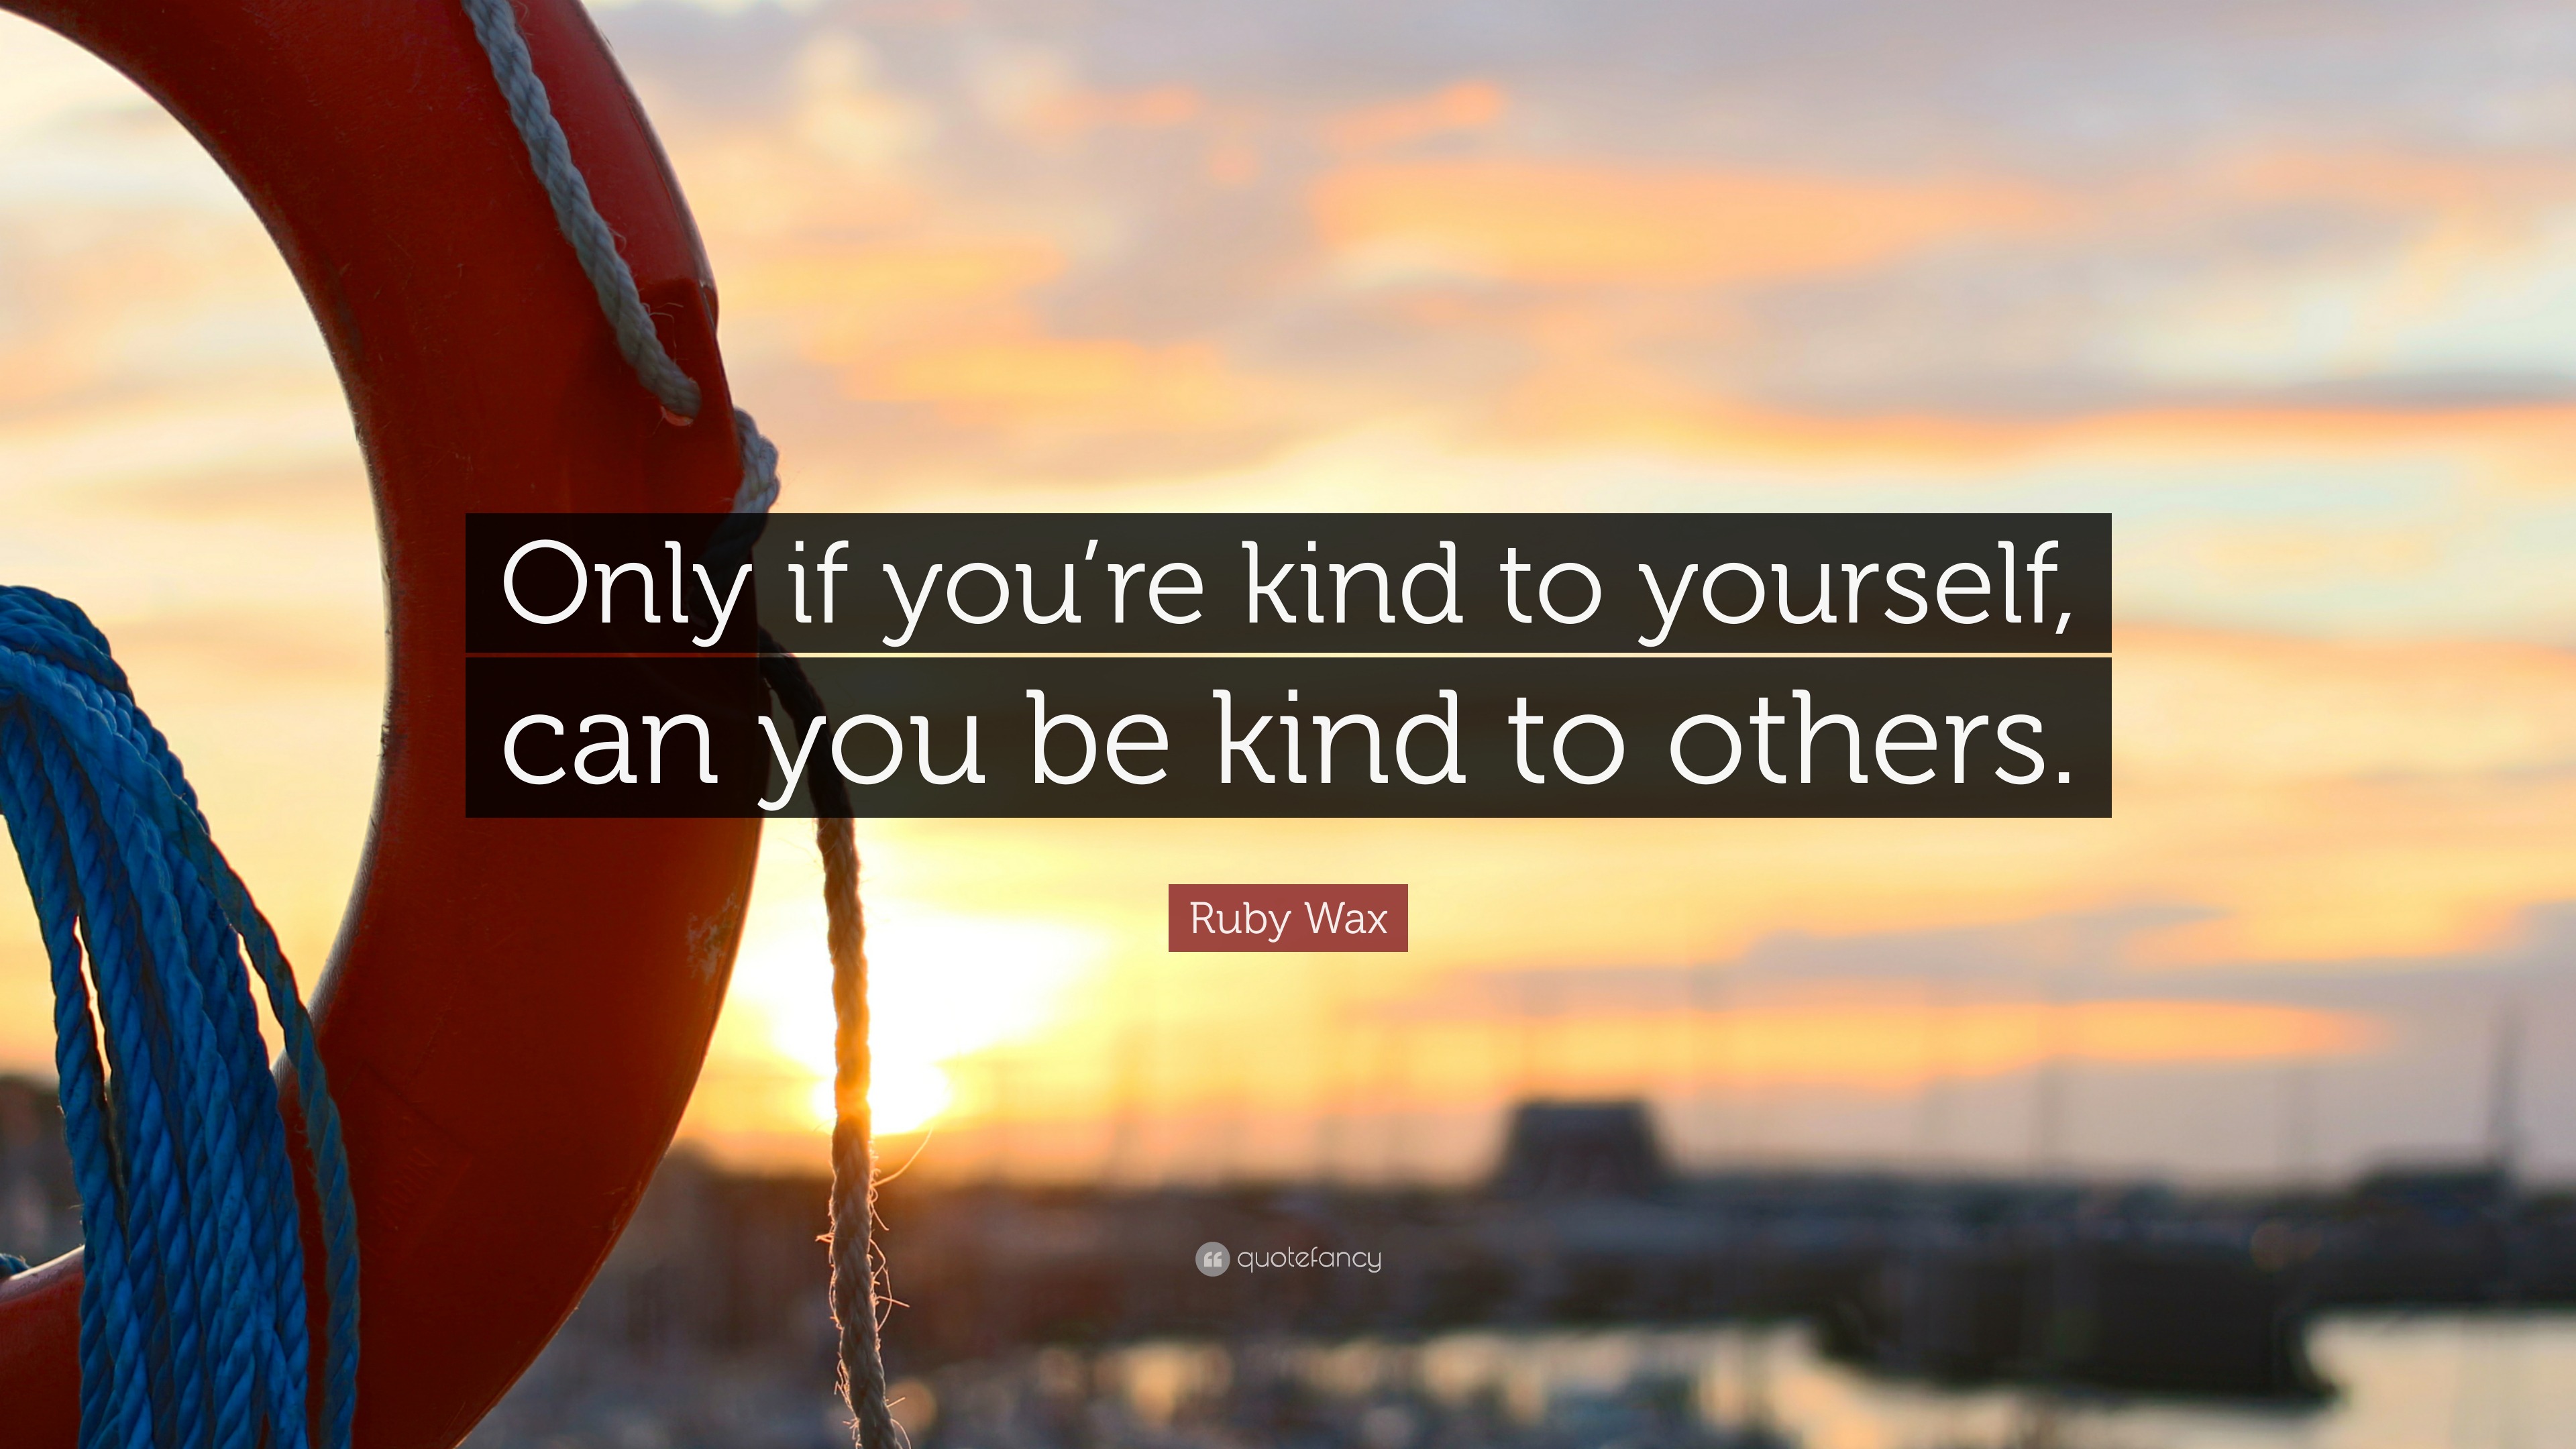 Ruby Wax Quote: “Only if you’re kind to yourself, can you be kind to ...